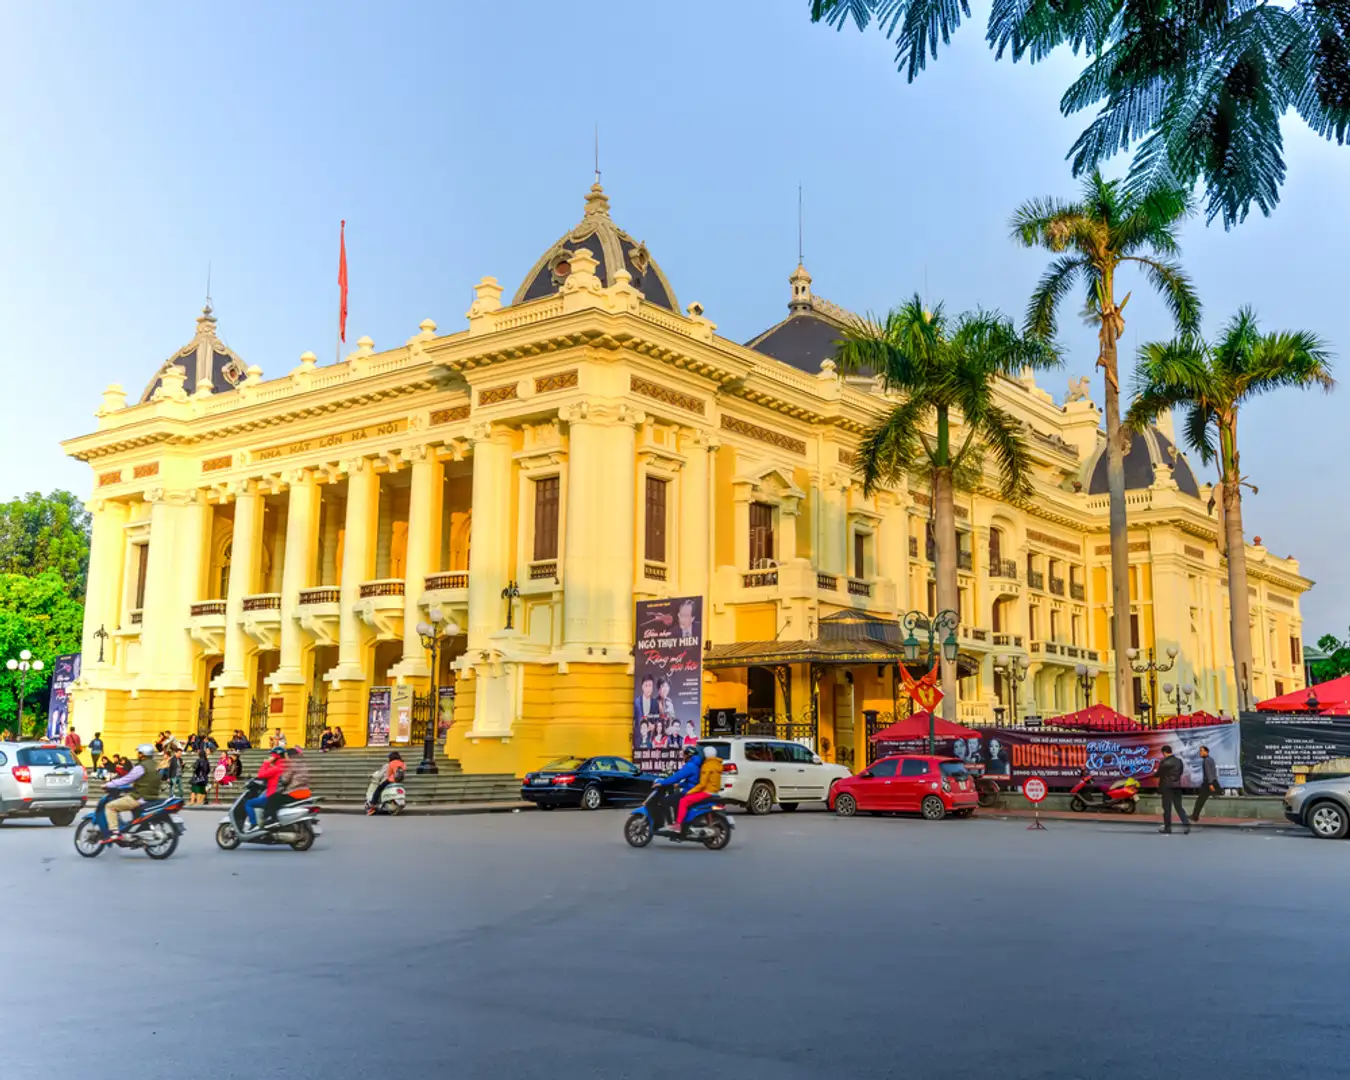 Hanoi Opera House stands as a cultural gem, blending French colonial elegance with Vietnamese heritage.